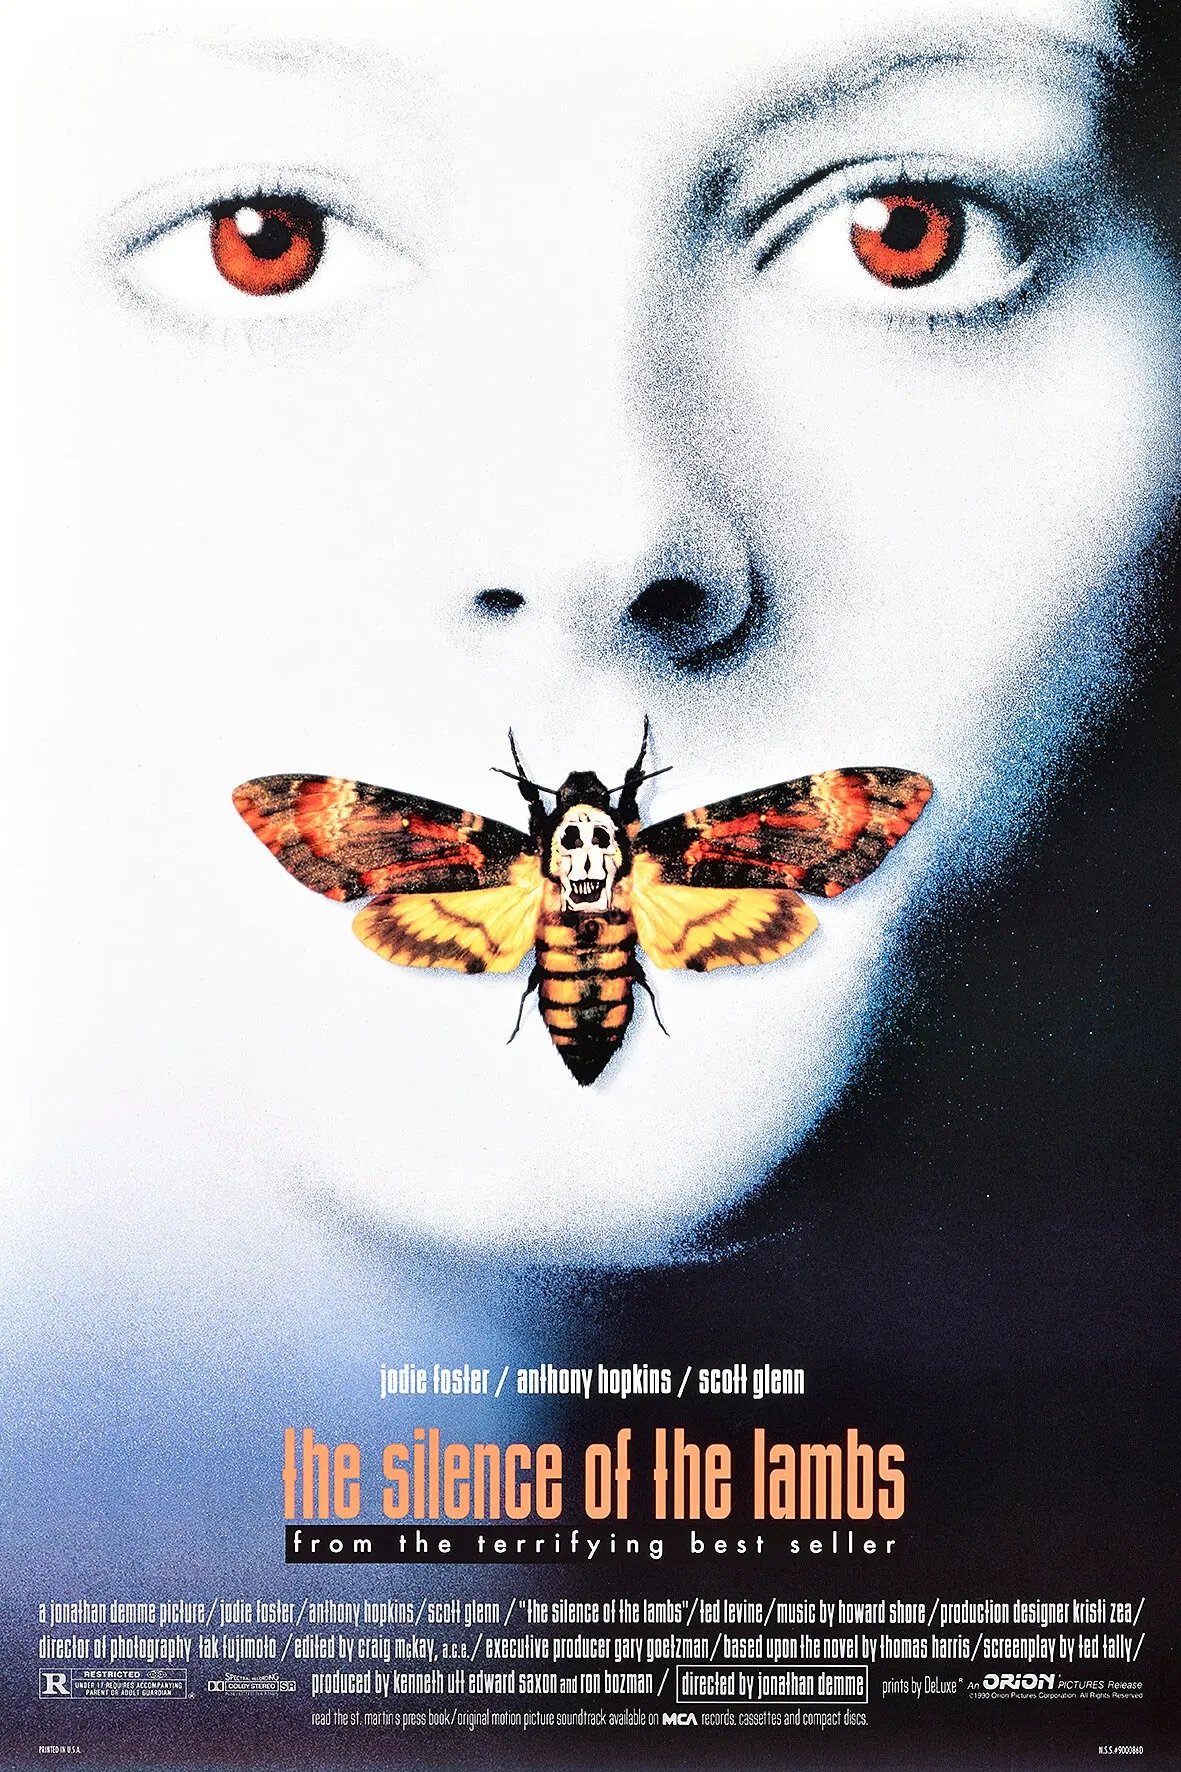 the movie poster for Silence of the Lambs